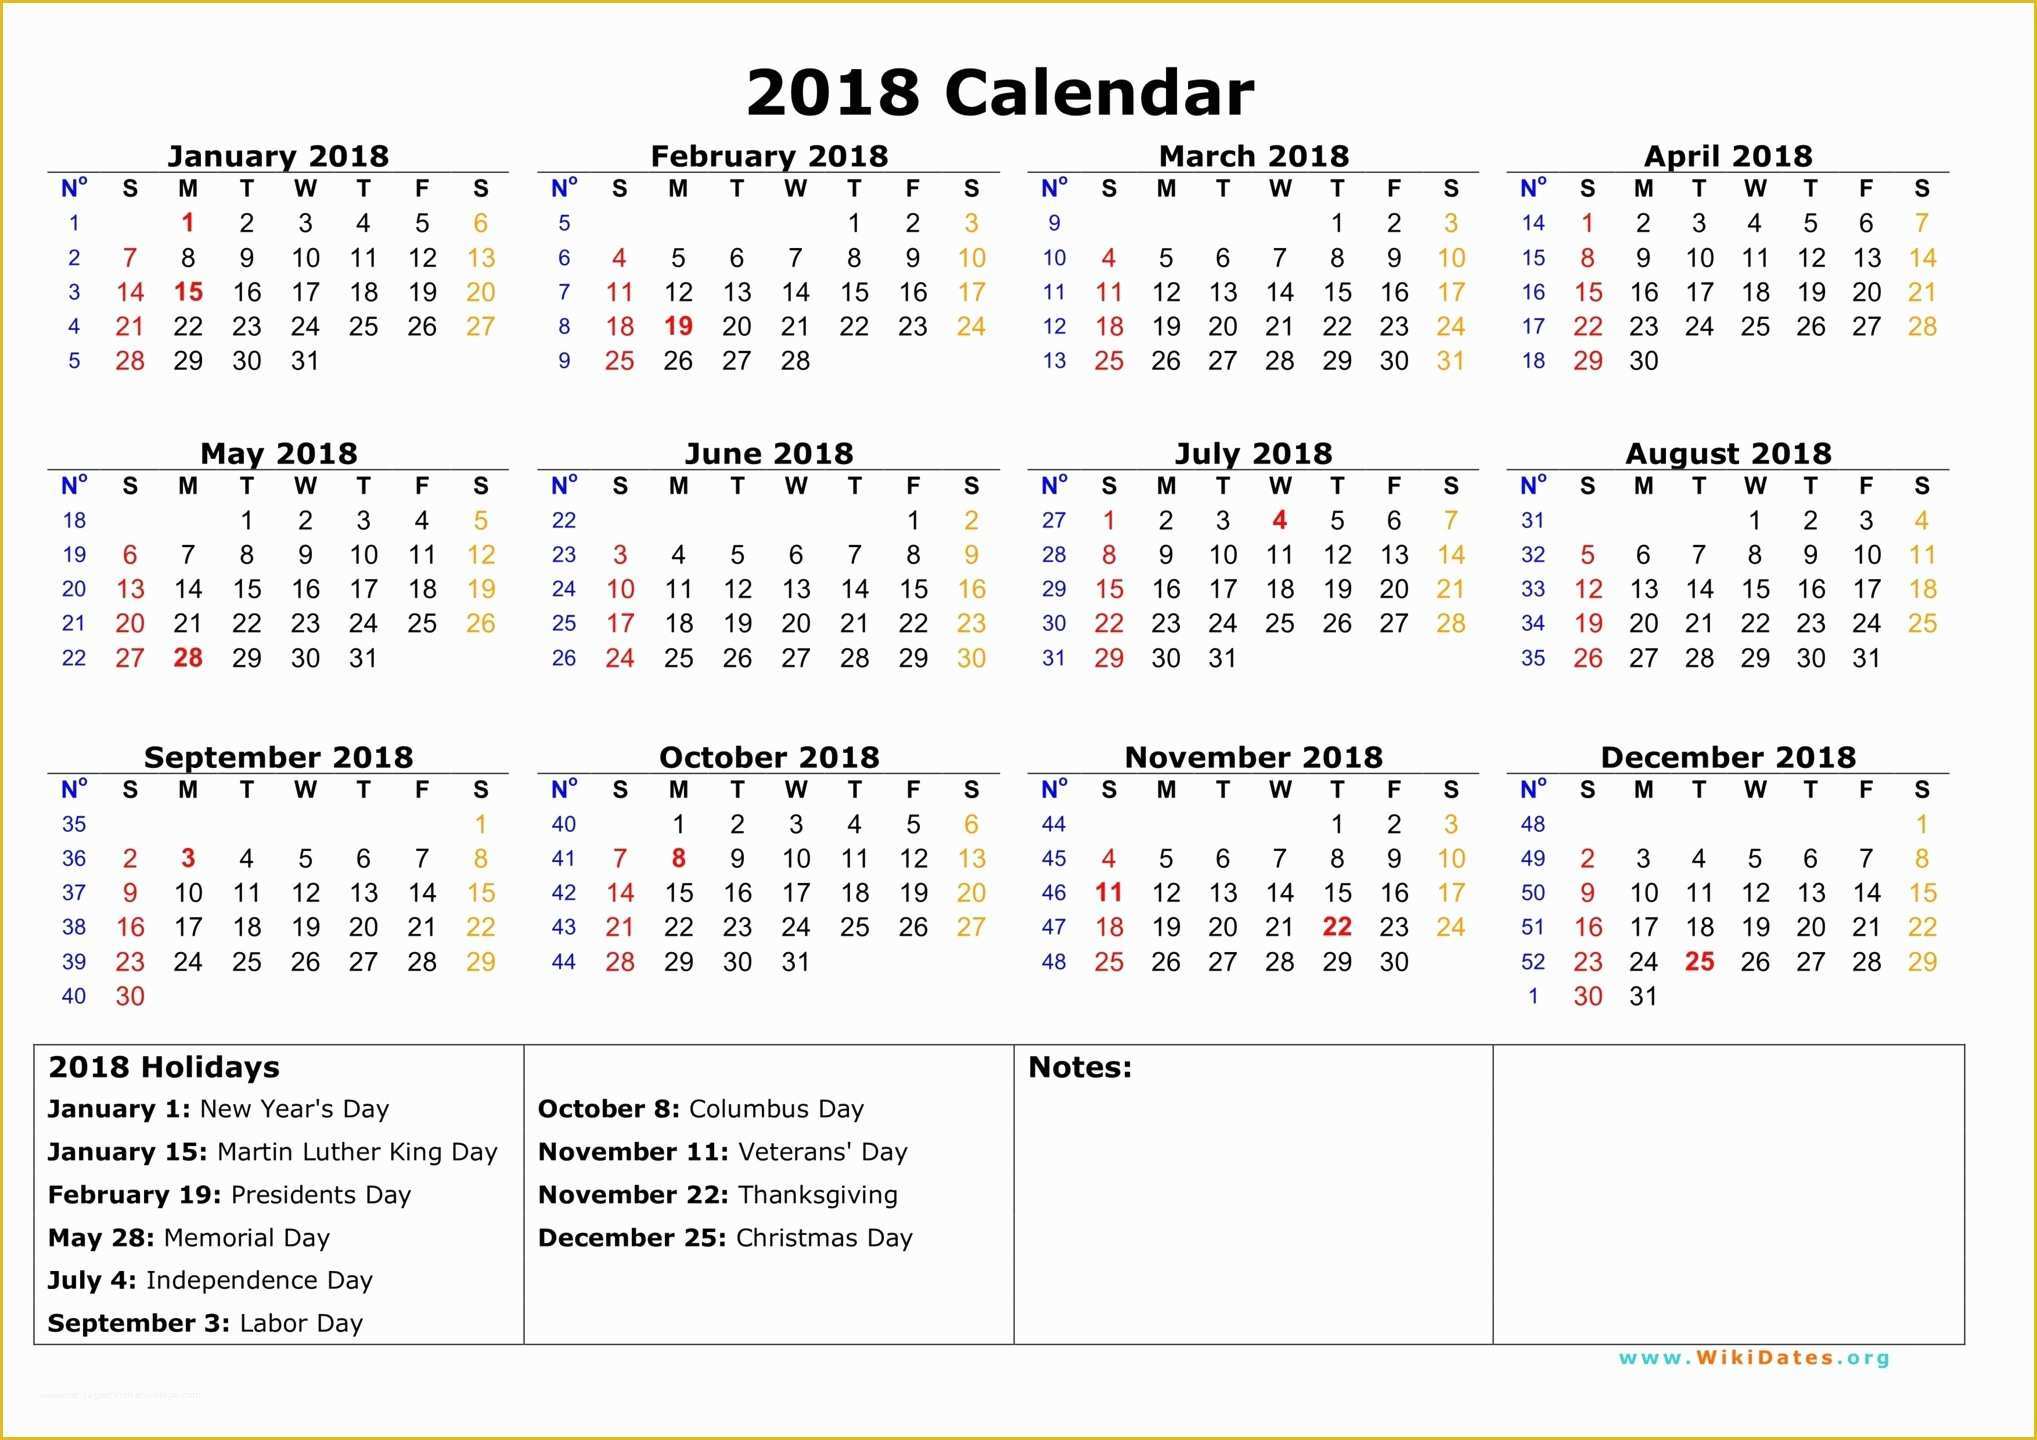 Holiday Schedule Template Free Of 2018 Calendar with Holidays